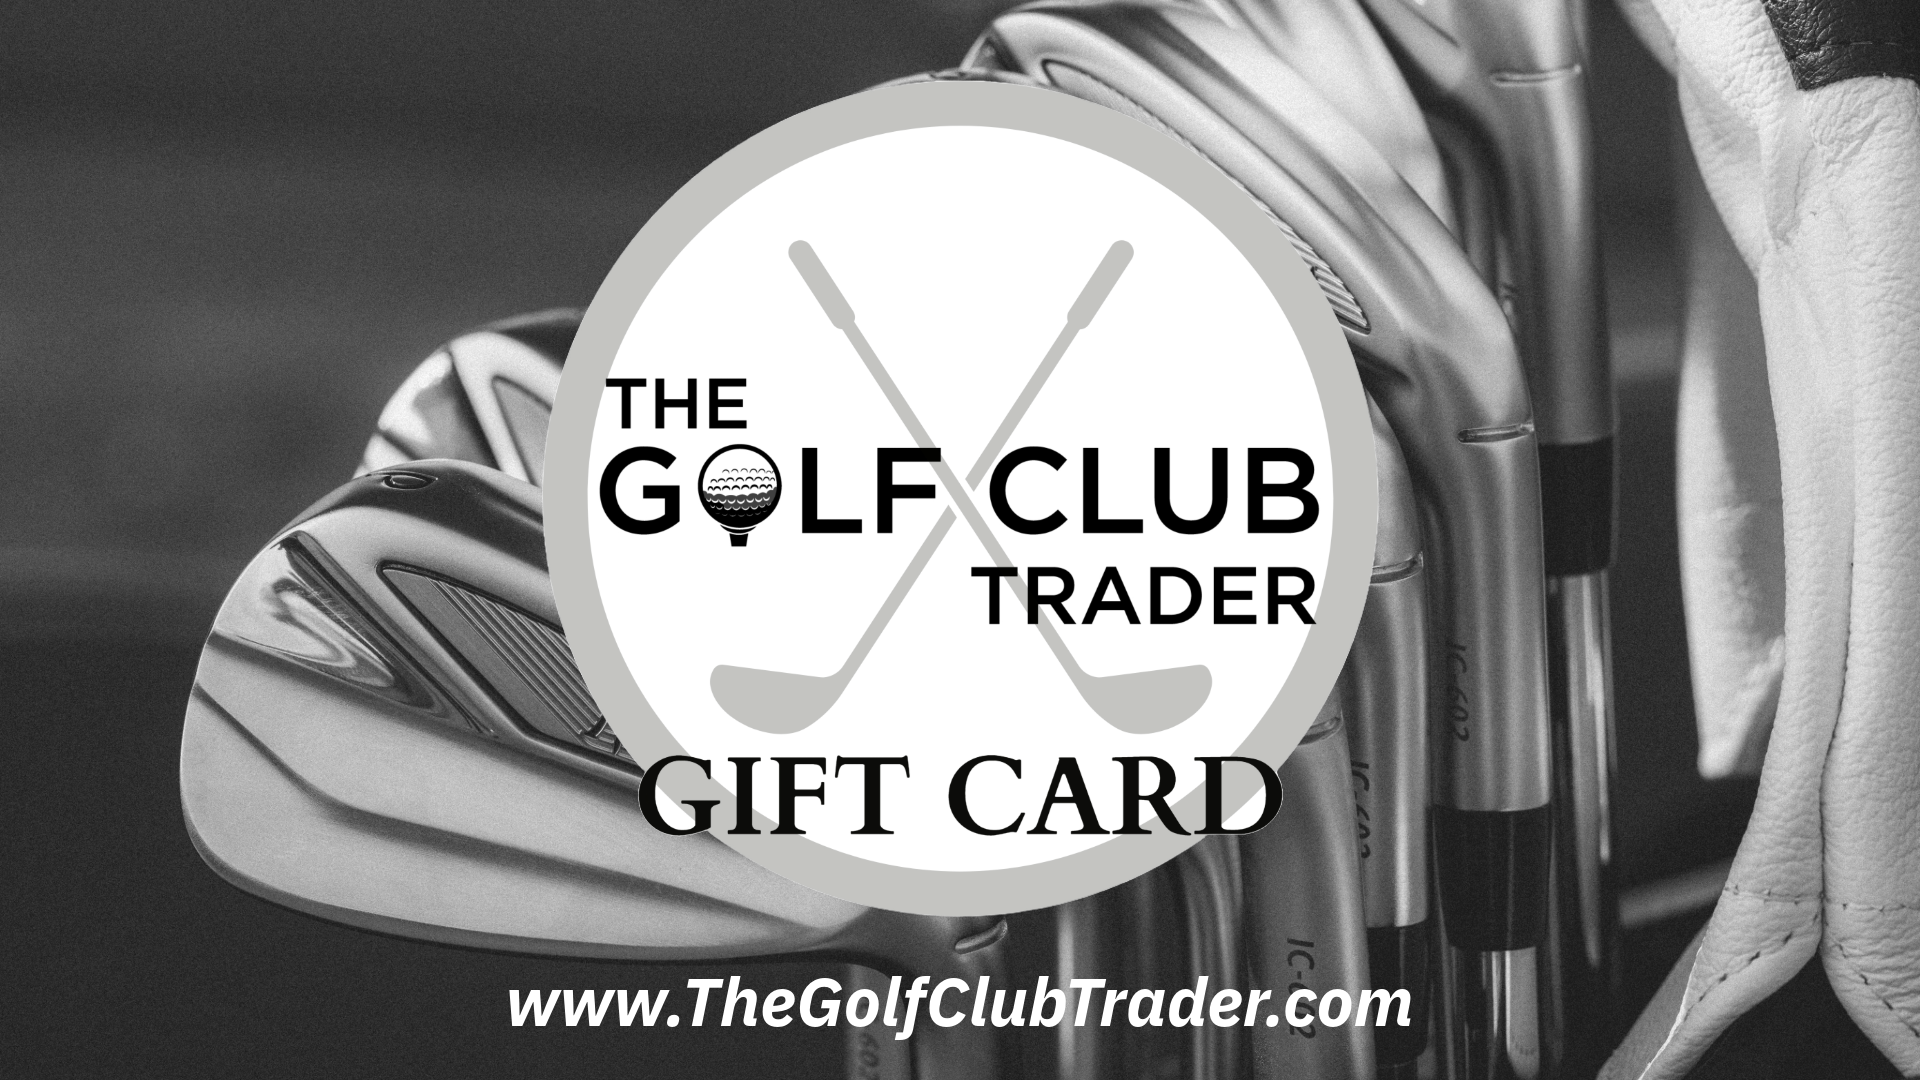 The Golf Club Trader Gift Card